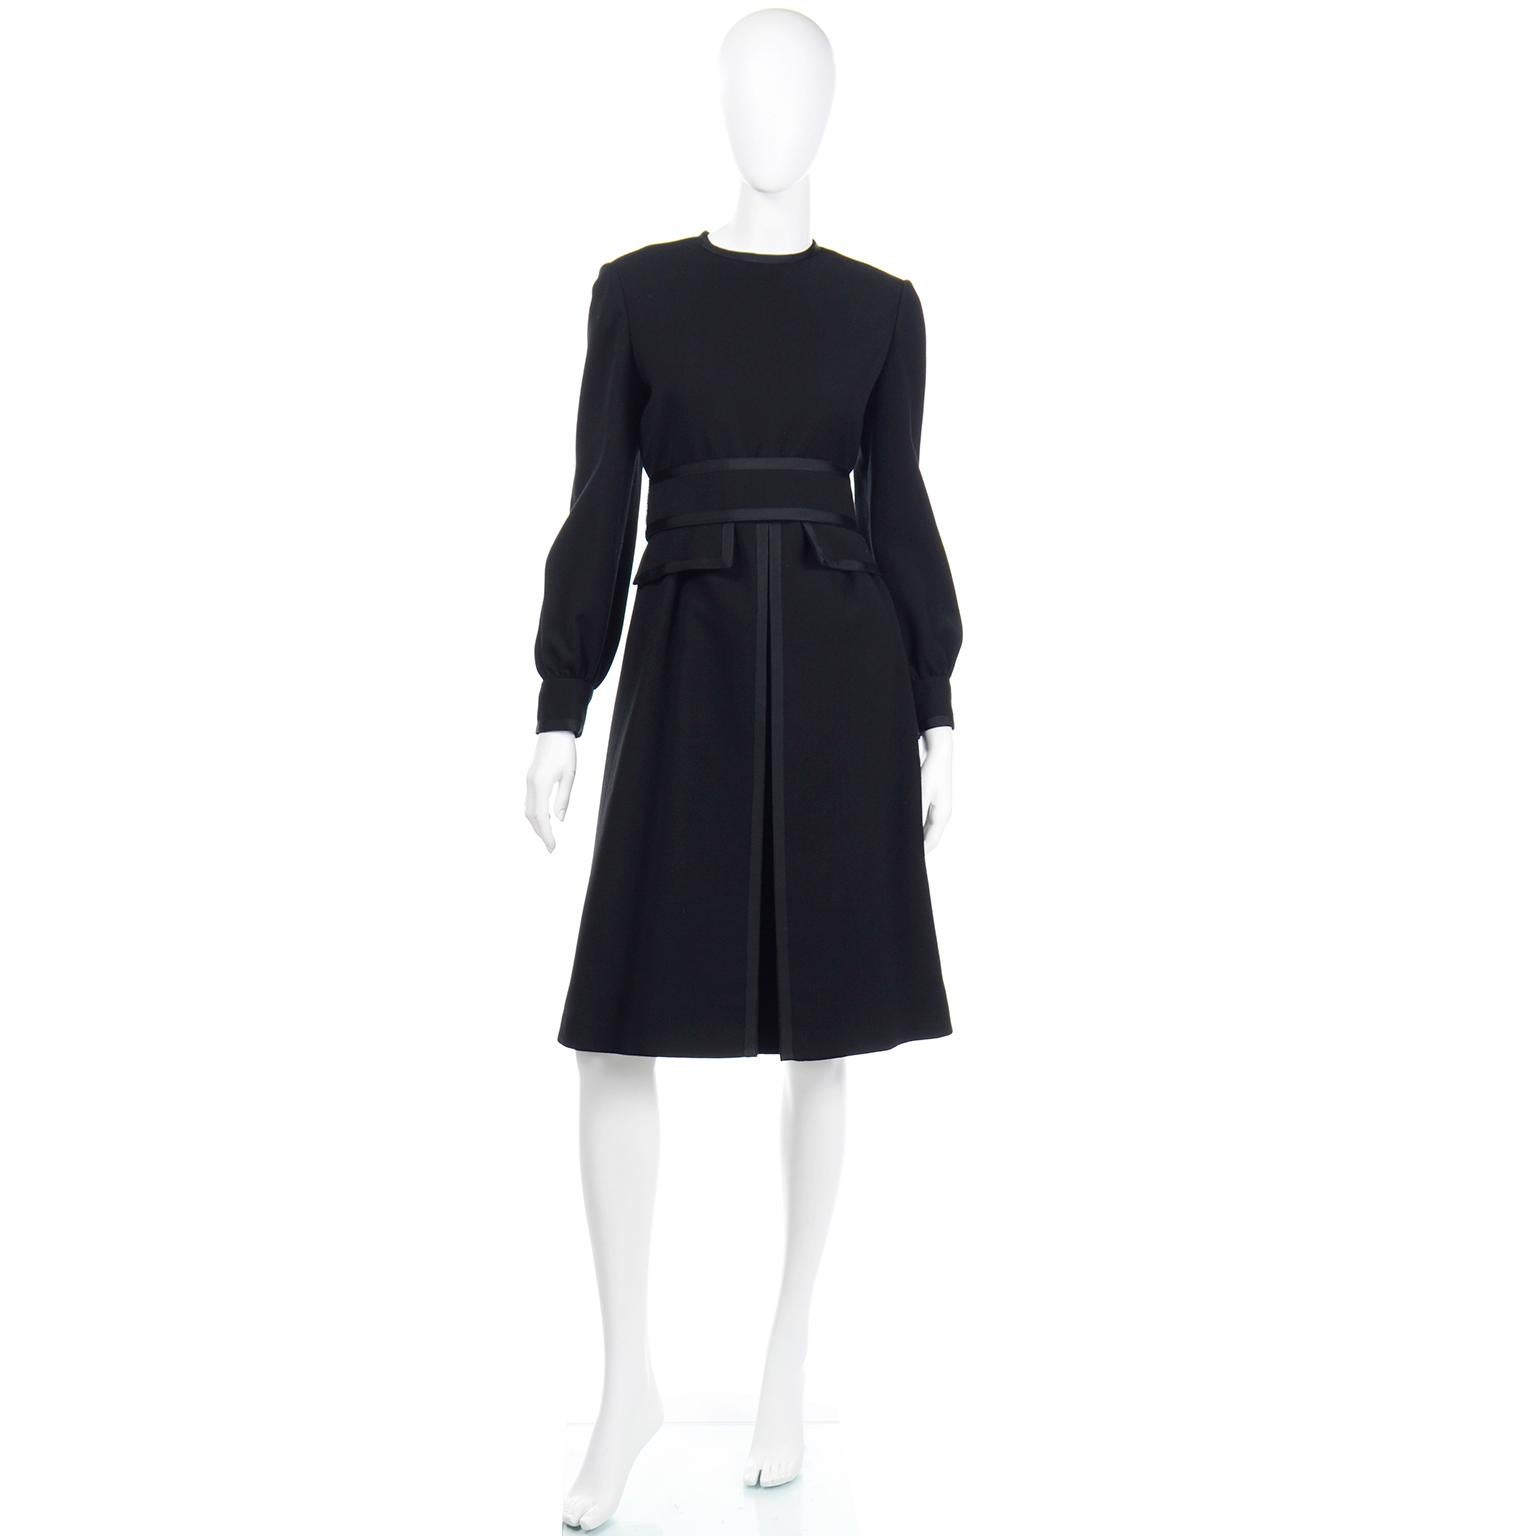 This vintage Geoffrey Beene dress is a perfect example of Mr. Beene's attention to detail and exceptional tailoring skills. The dress is in a black wool and has so many special details including the grosgrain trim that defines the pleat at the